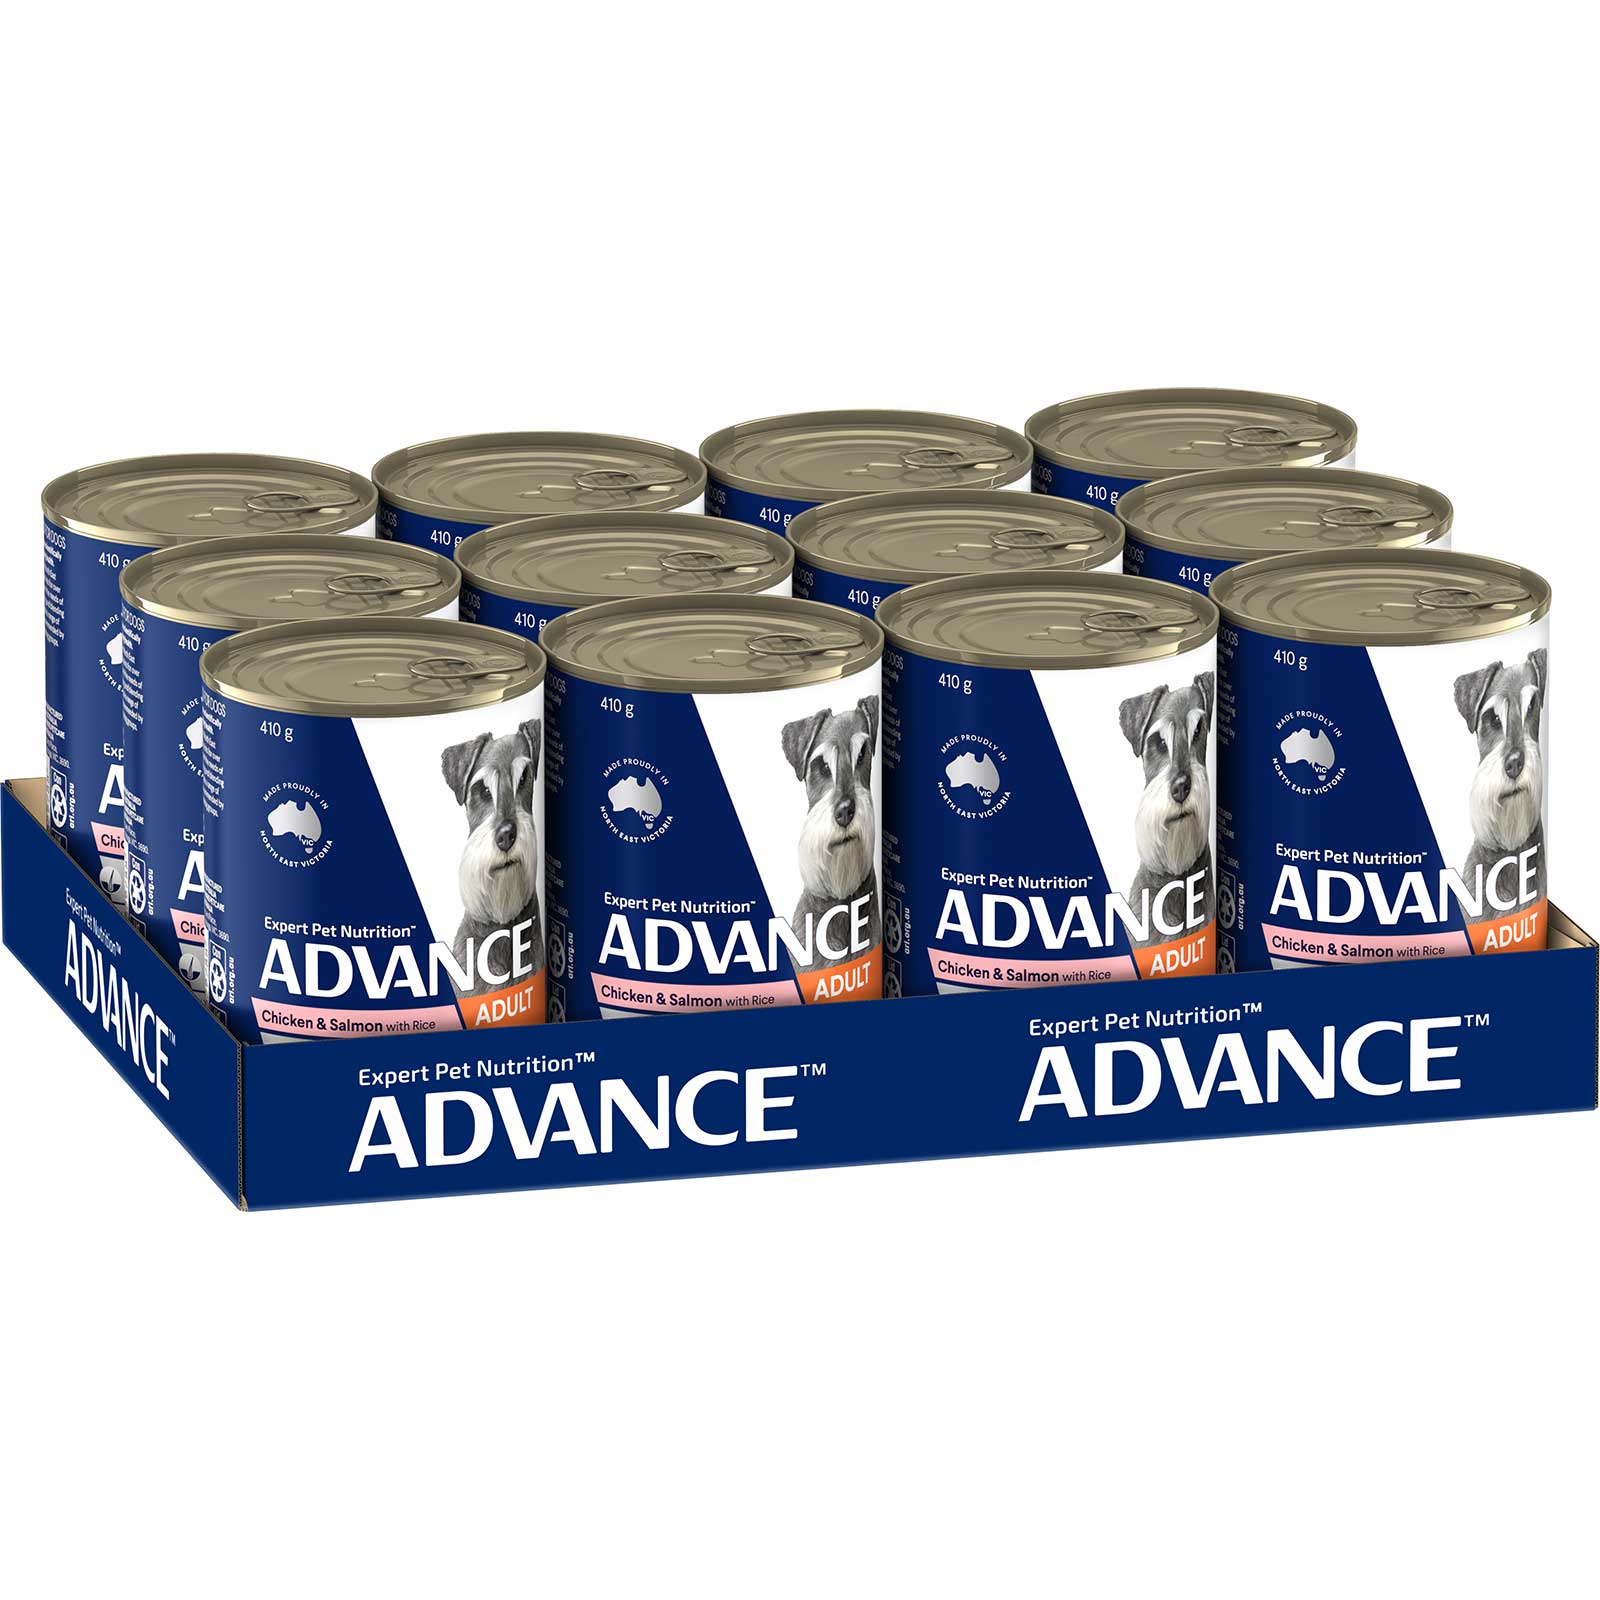 Advance Dog Food Can Adult Chicken & Salmon with Rice